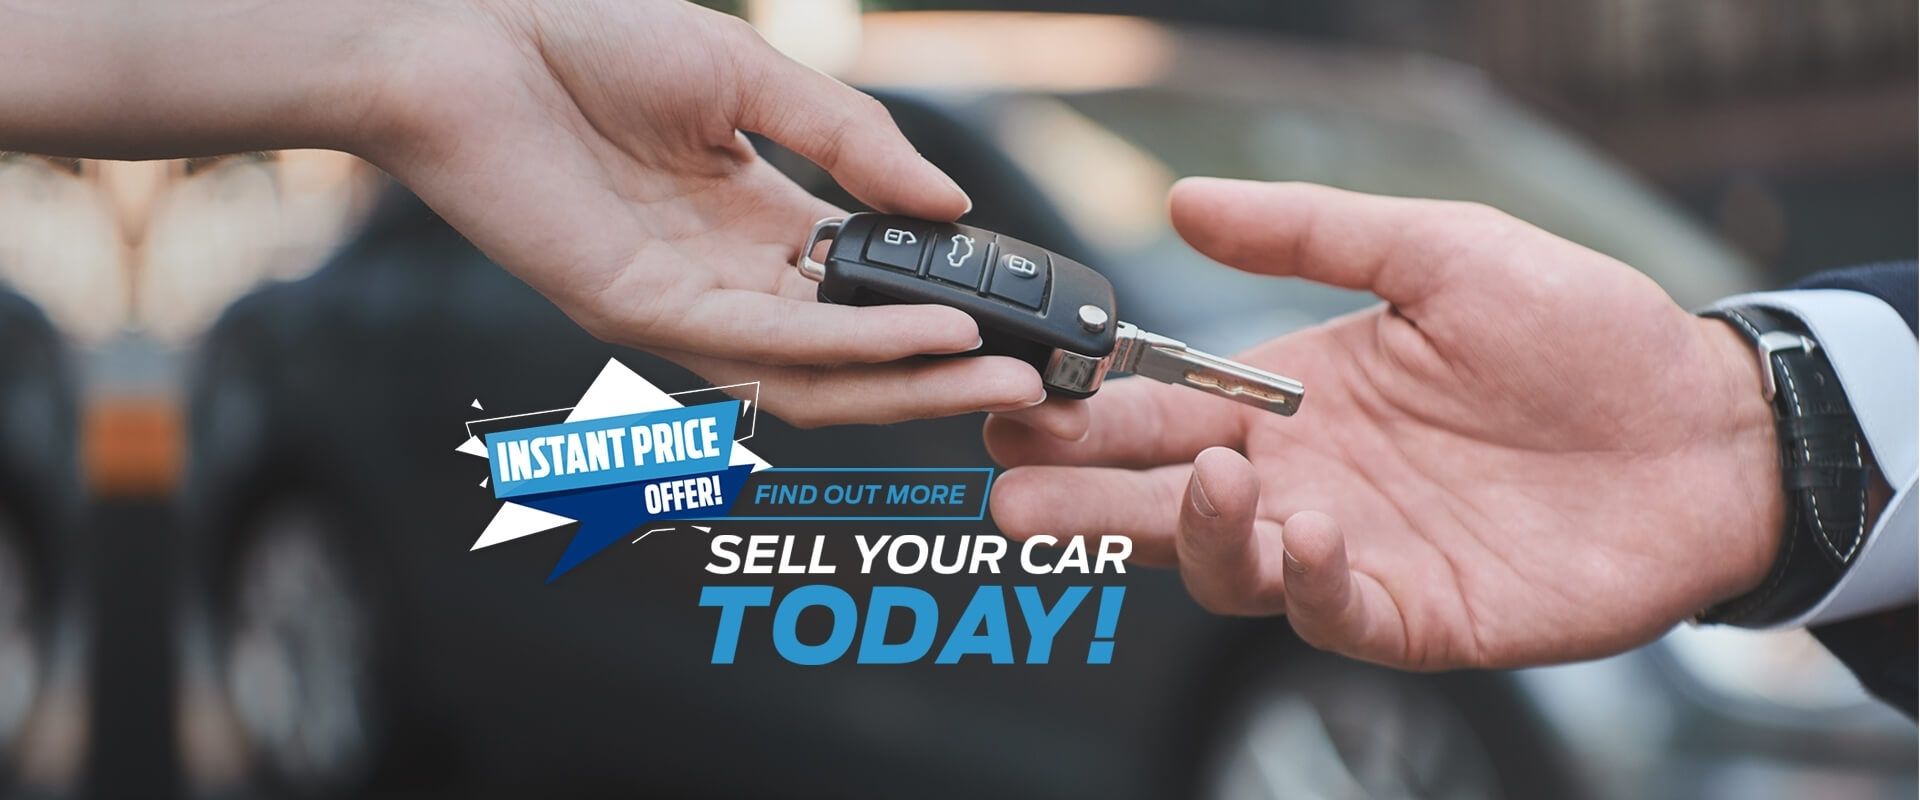 Instant Price Offer! Sell your car today!